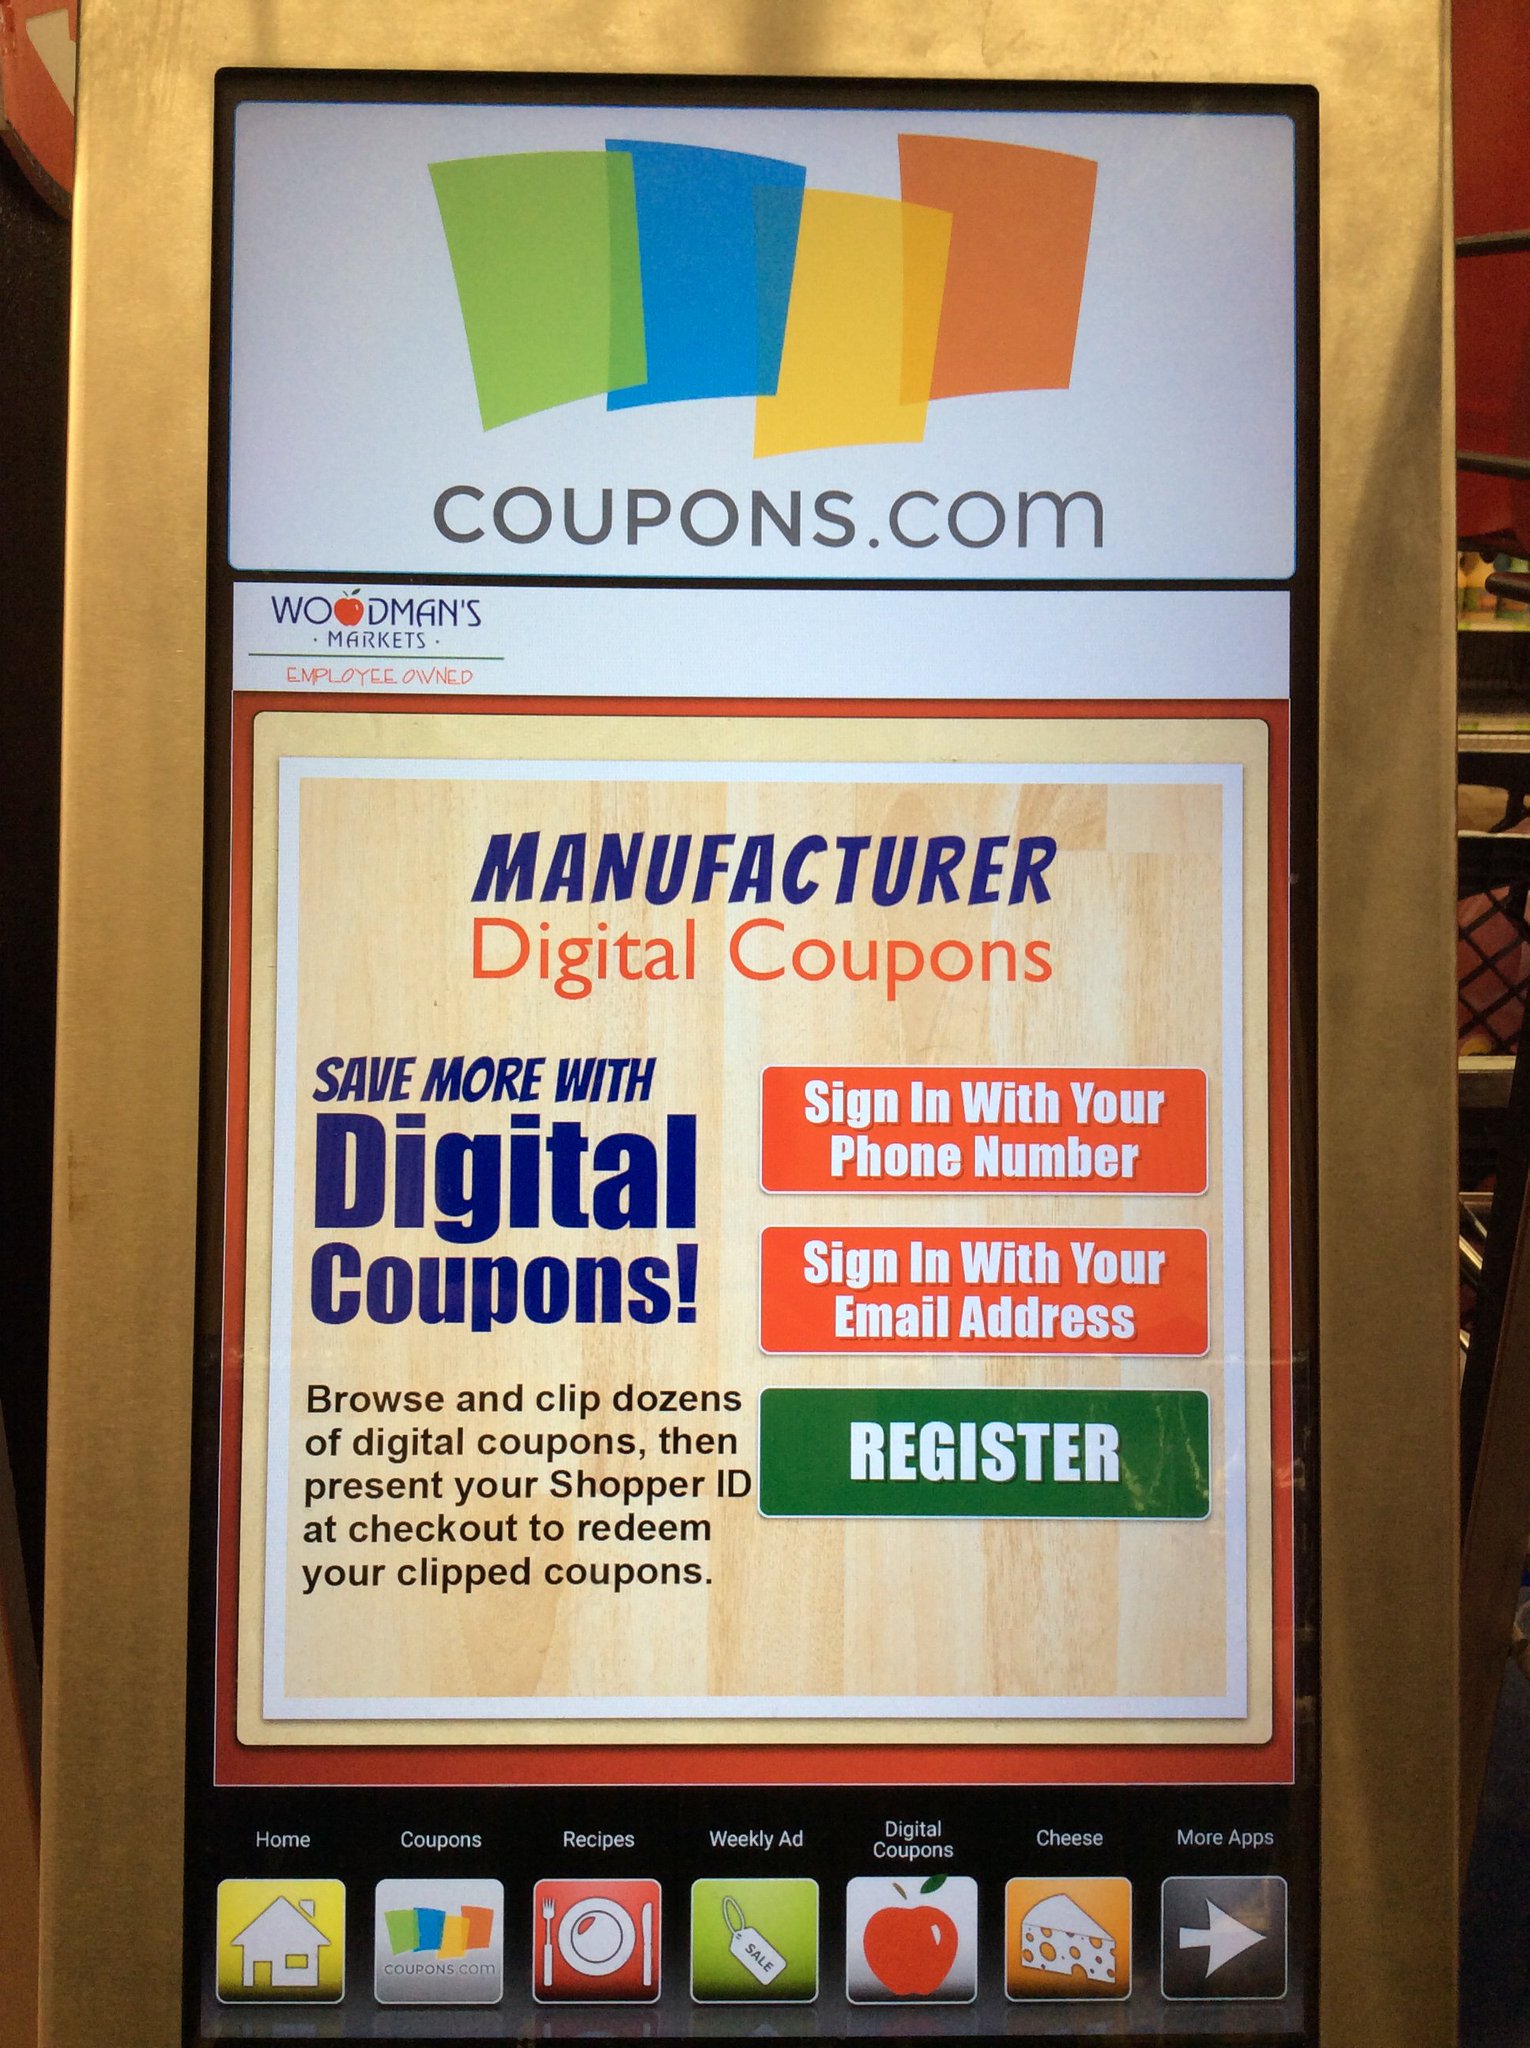 Woodmans Food Market On Twitter Access Digital Manufacturer Coupons Directly From Our In Store Kiosks